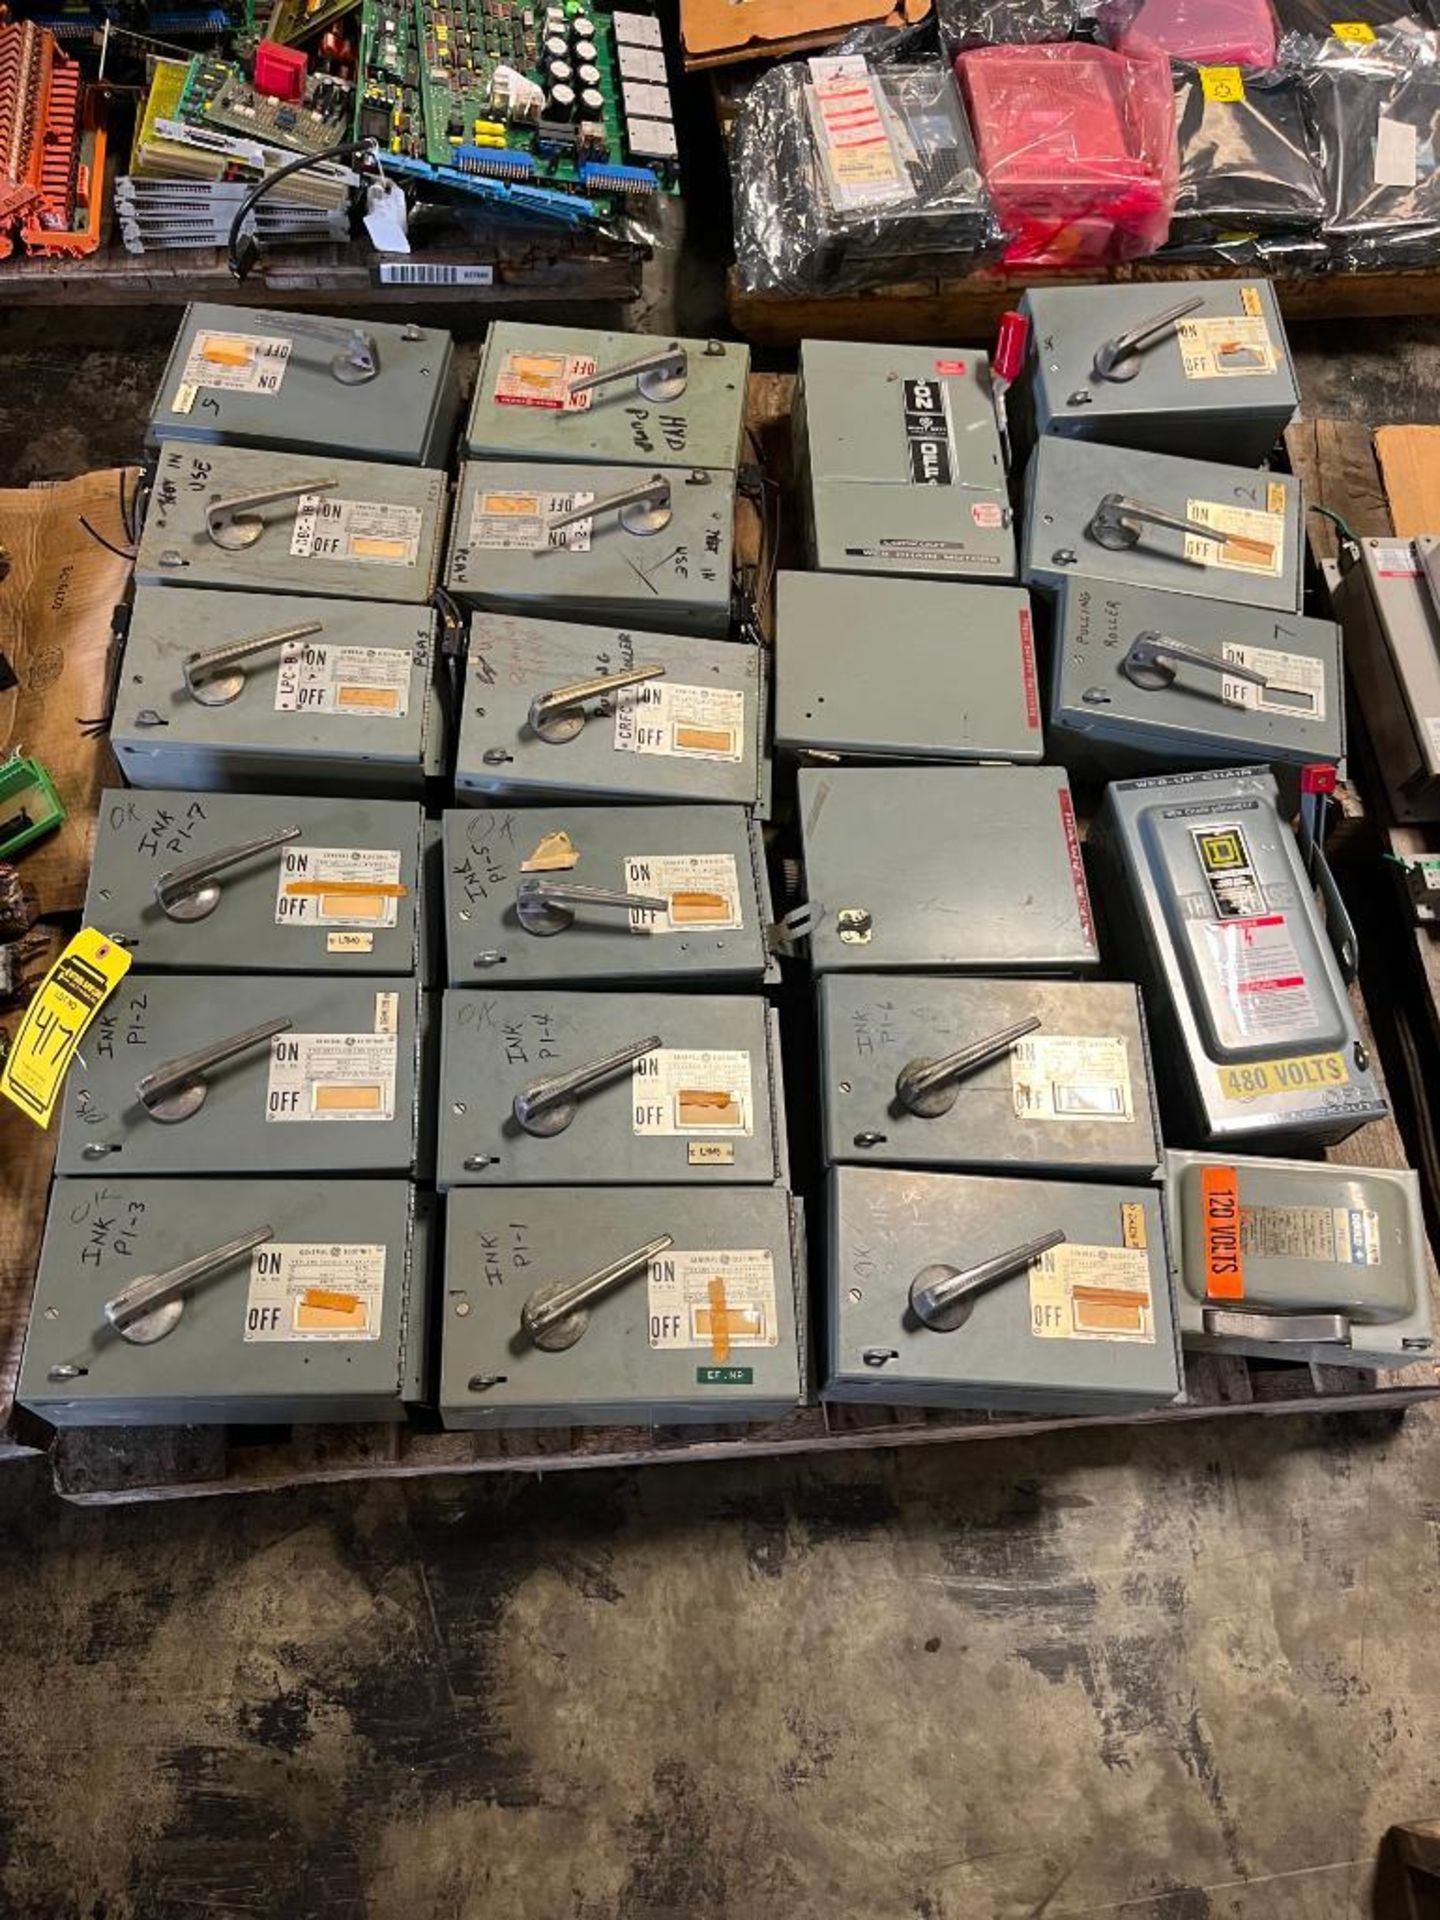 Skid Consisting of Assorted Safety Switches, General Electric Shut-off Switch Boxes, Mini-Enclosures